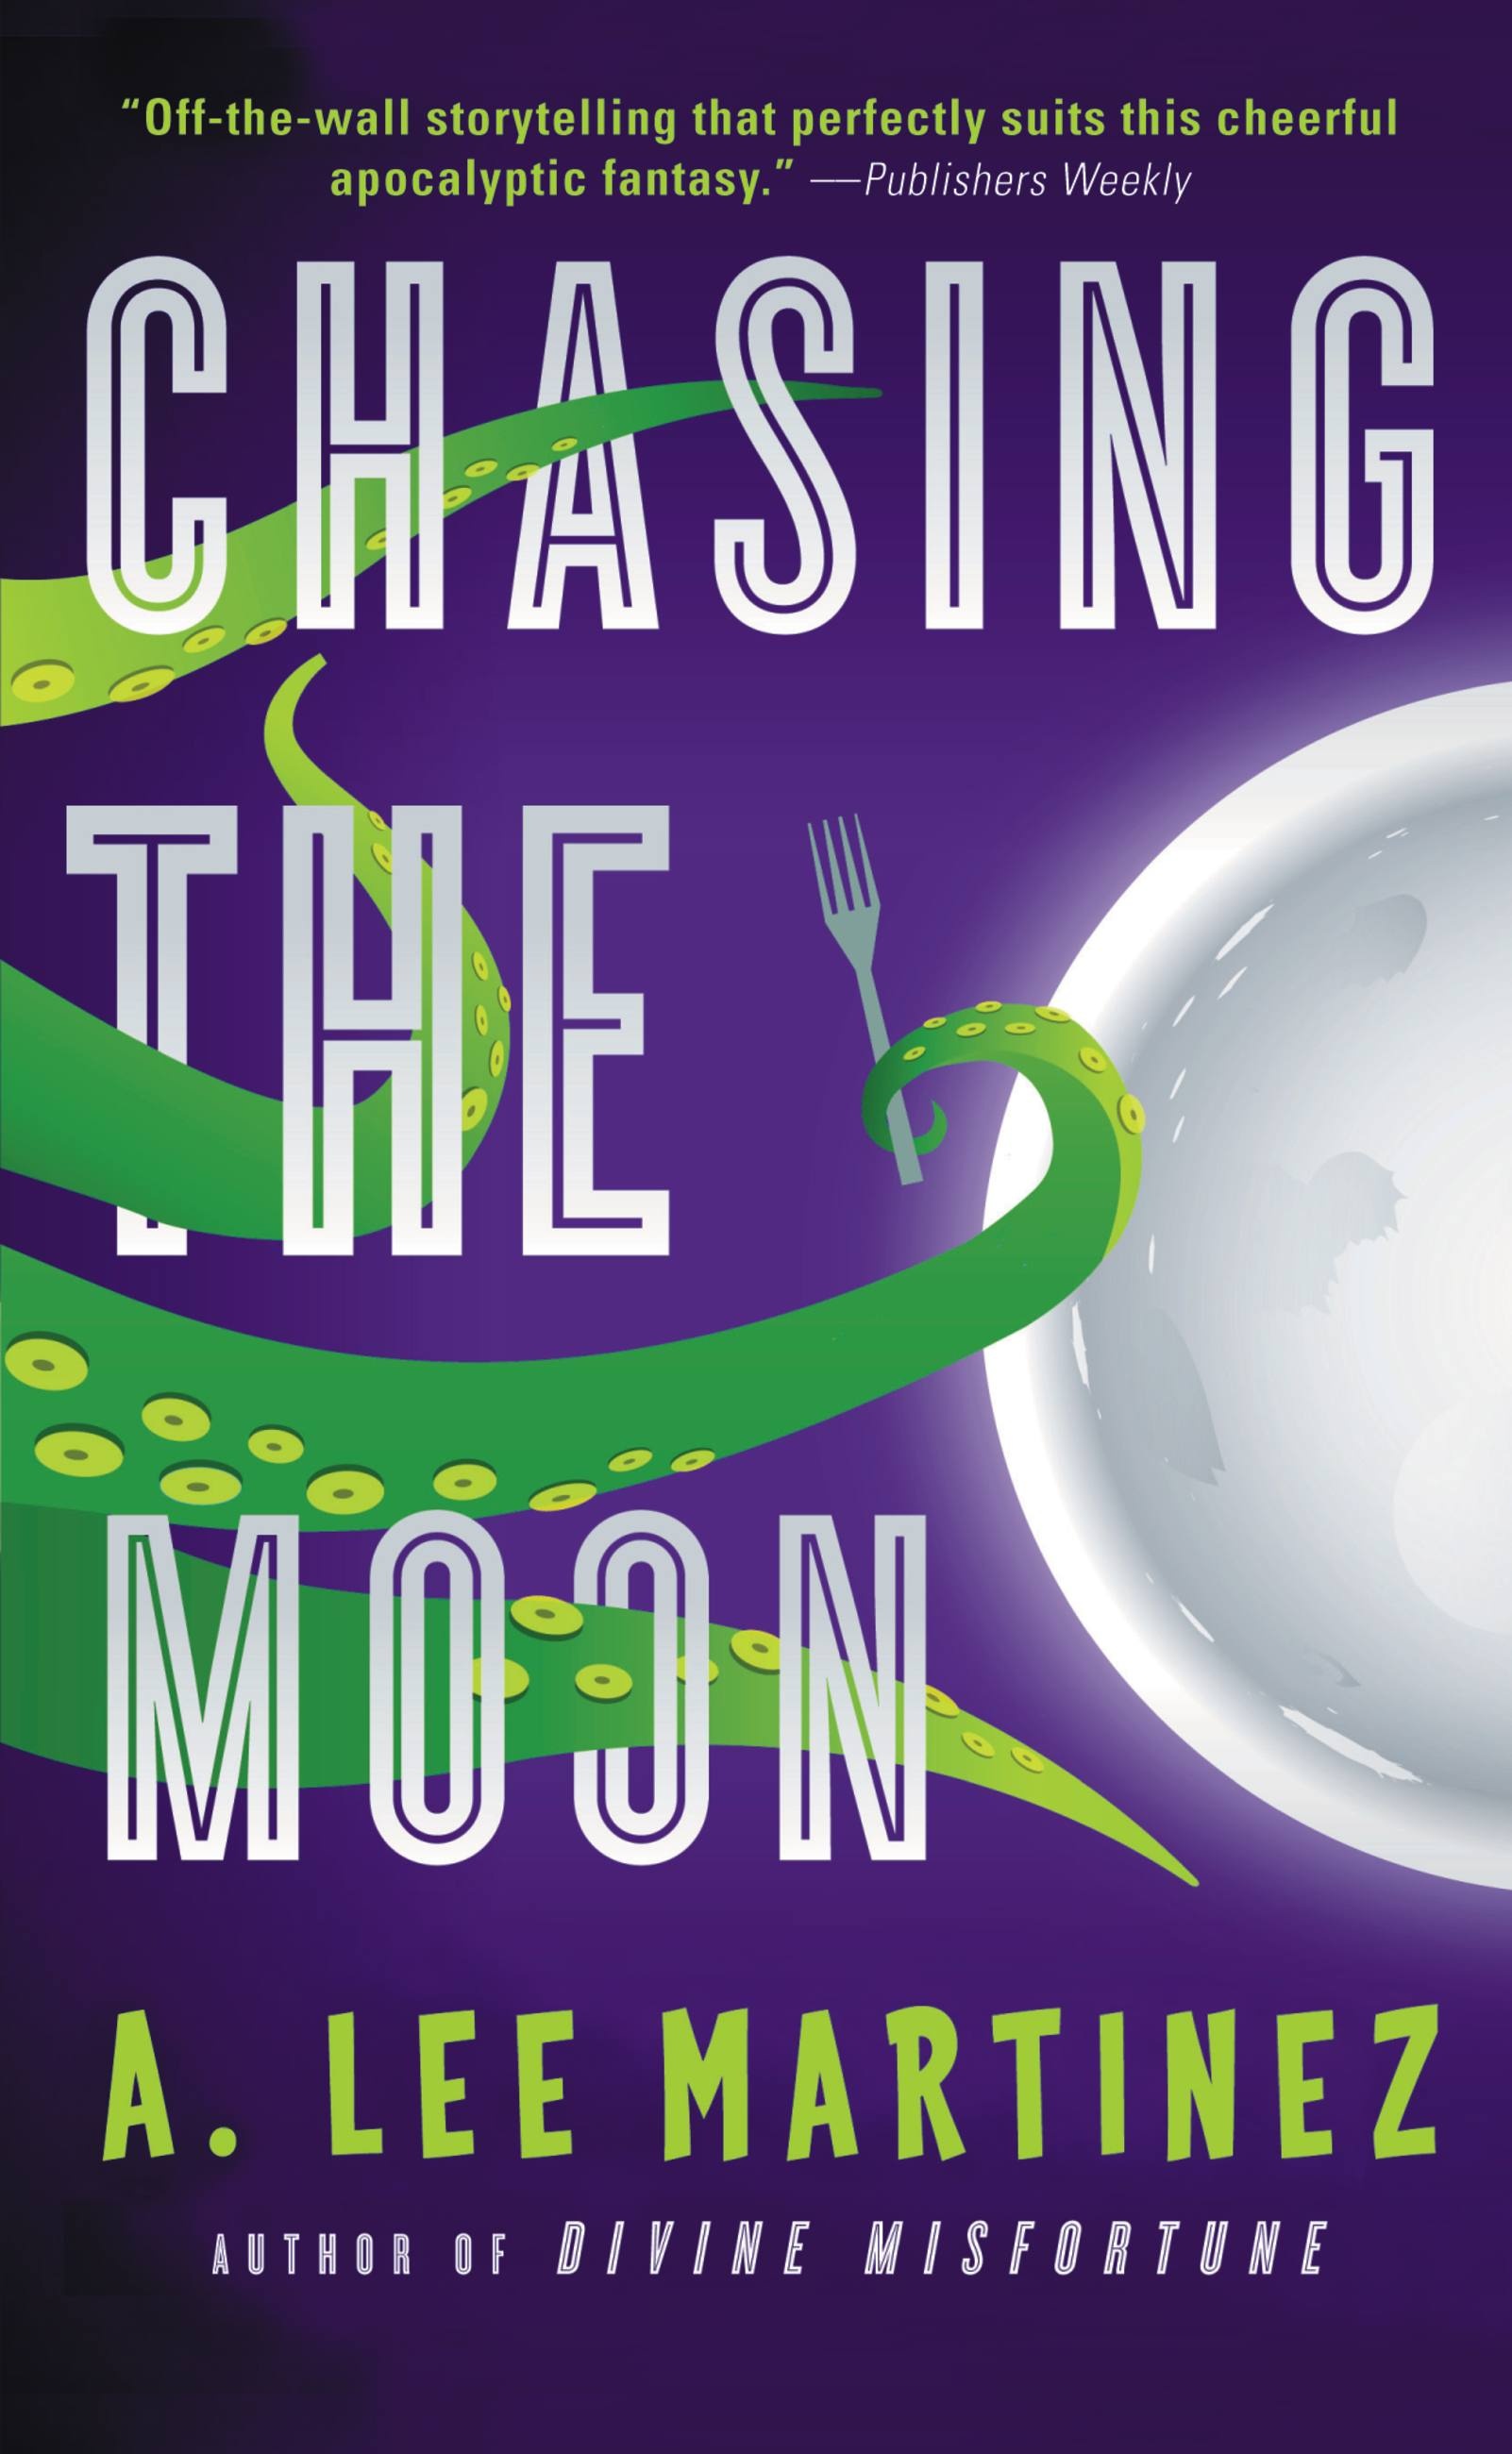 Chasing the Moon by A. Lee Martinez | Hachette Book Group